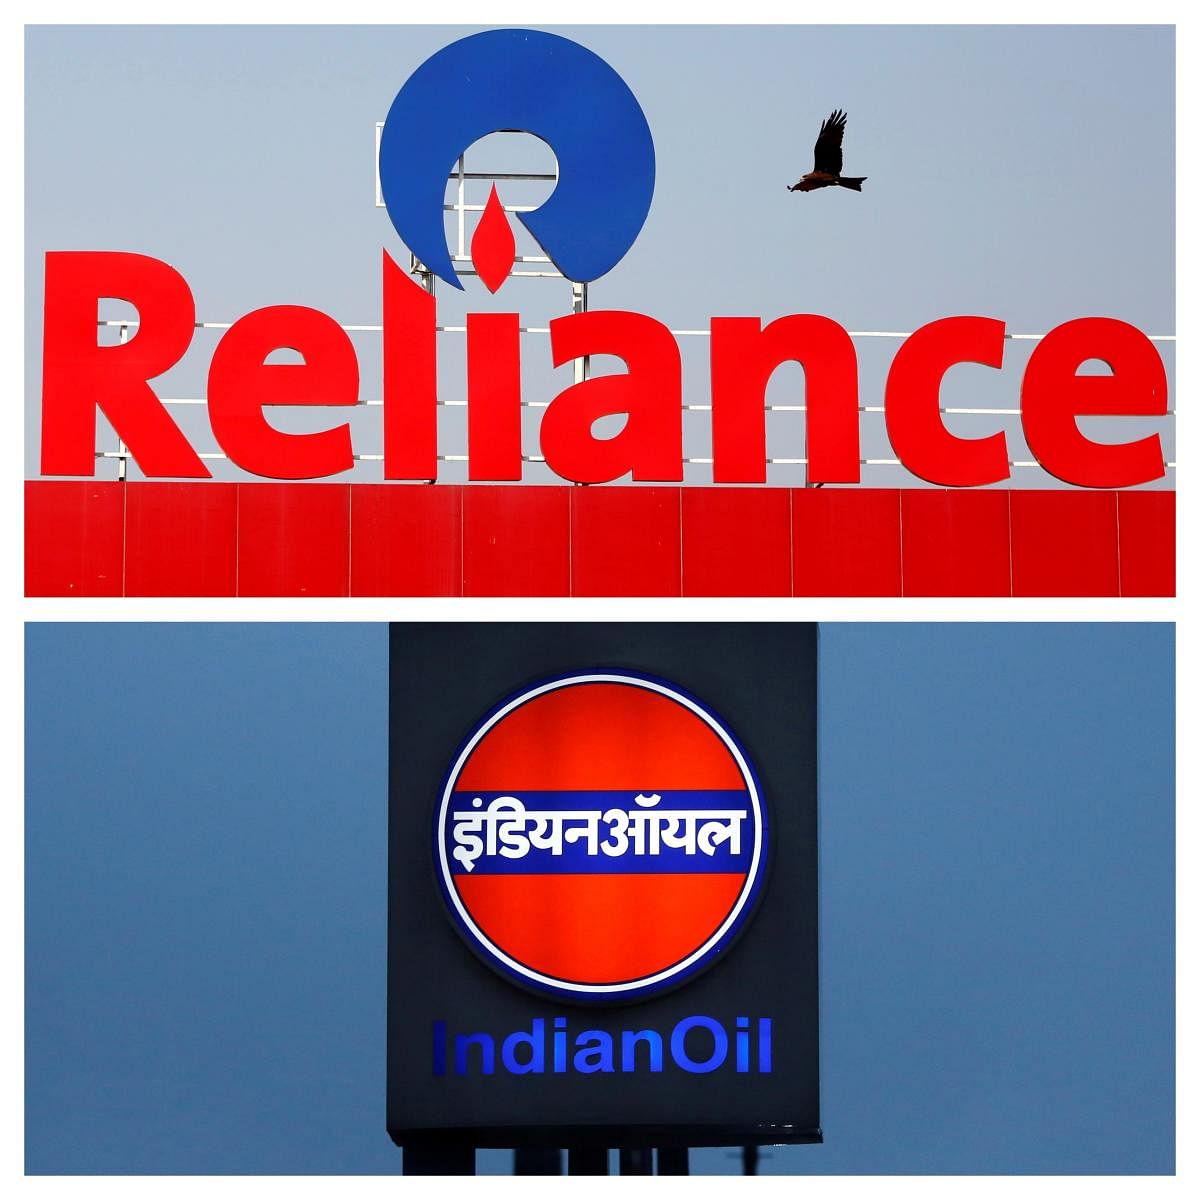 Boosted by its consumer-facing businesses like organised retail and telecom, Reliance Industries ended state-owned Indian Oil Corporation's (IOC) 10-year reign as India's largest company, topping the Fortune India 500 list. (Reuters Photo)